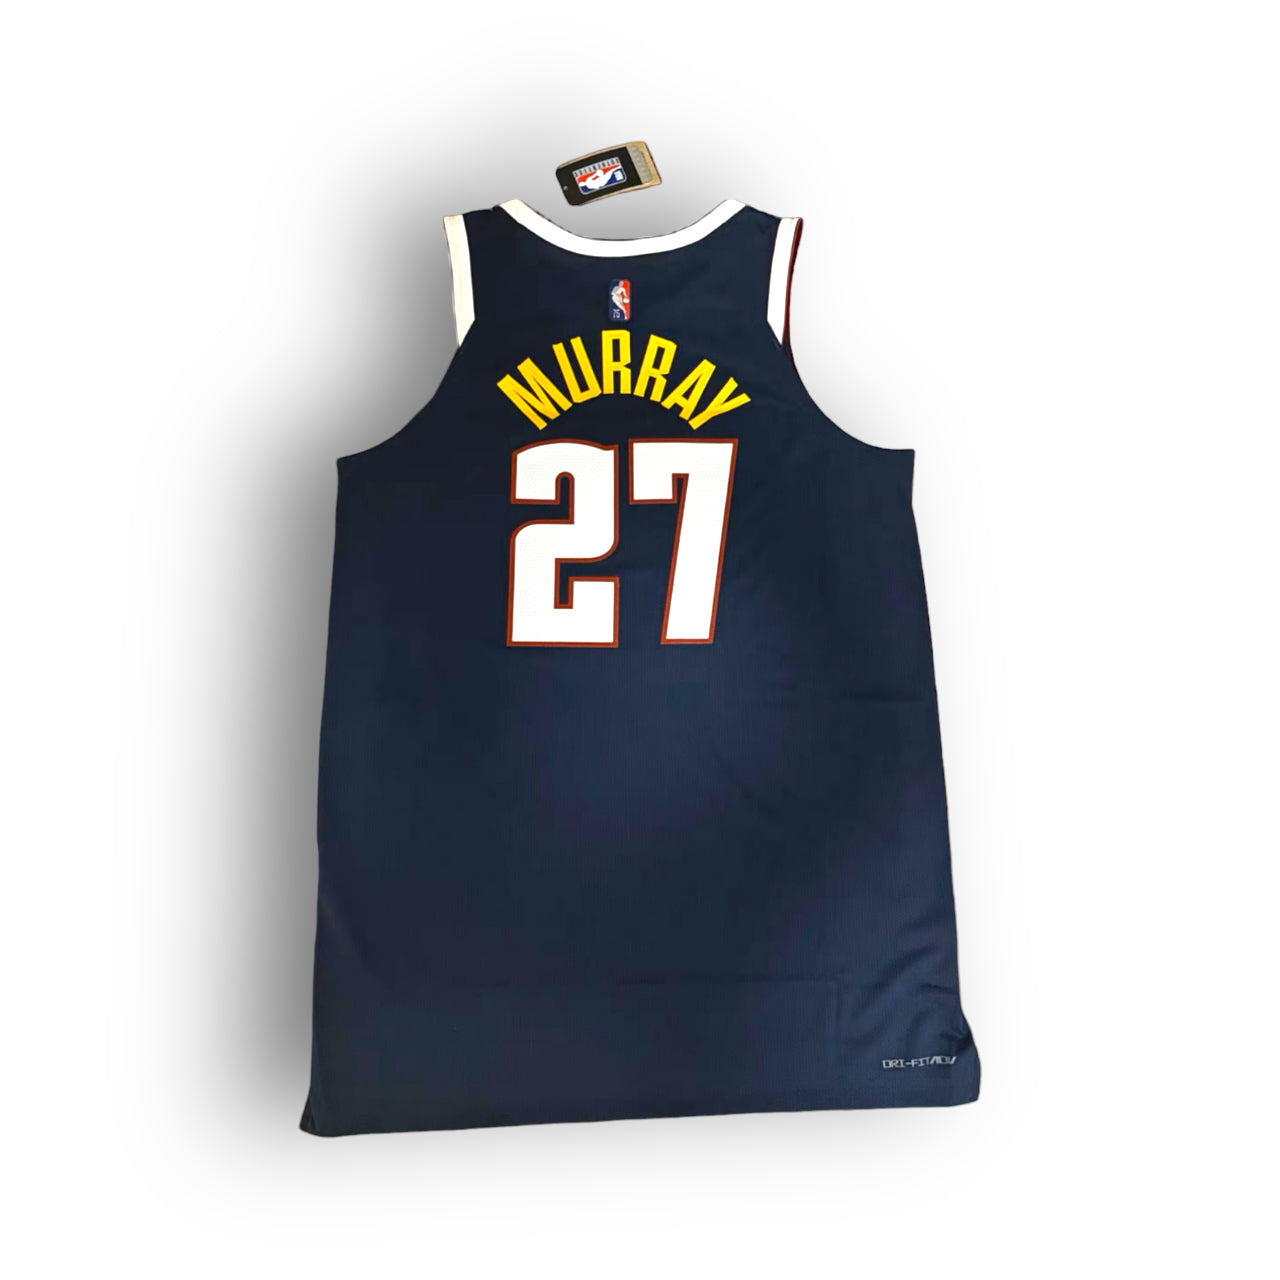 Jamal Murray Denver Nuggets 2021-2022 NBA 75th Anniversary Icon Edition Nike Authentic Jersey - Navy (with "Western Union Patch") - Hoop Jersey Store